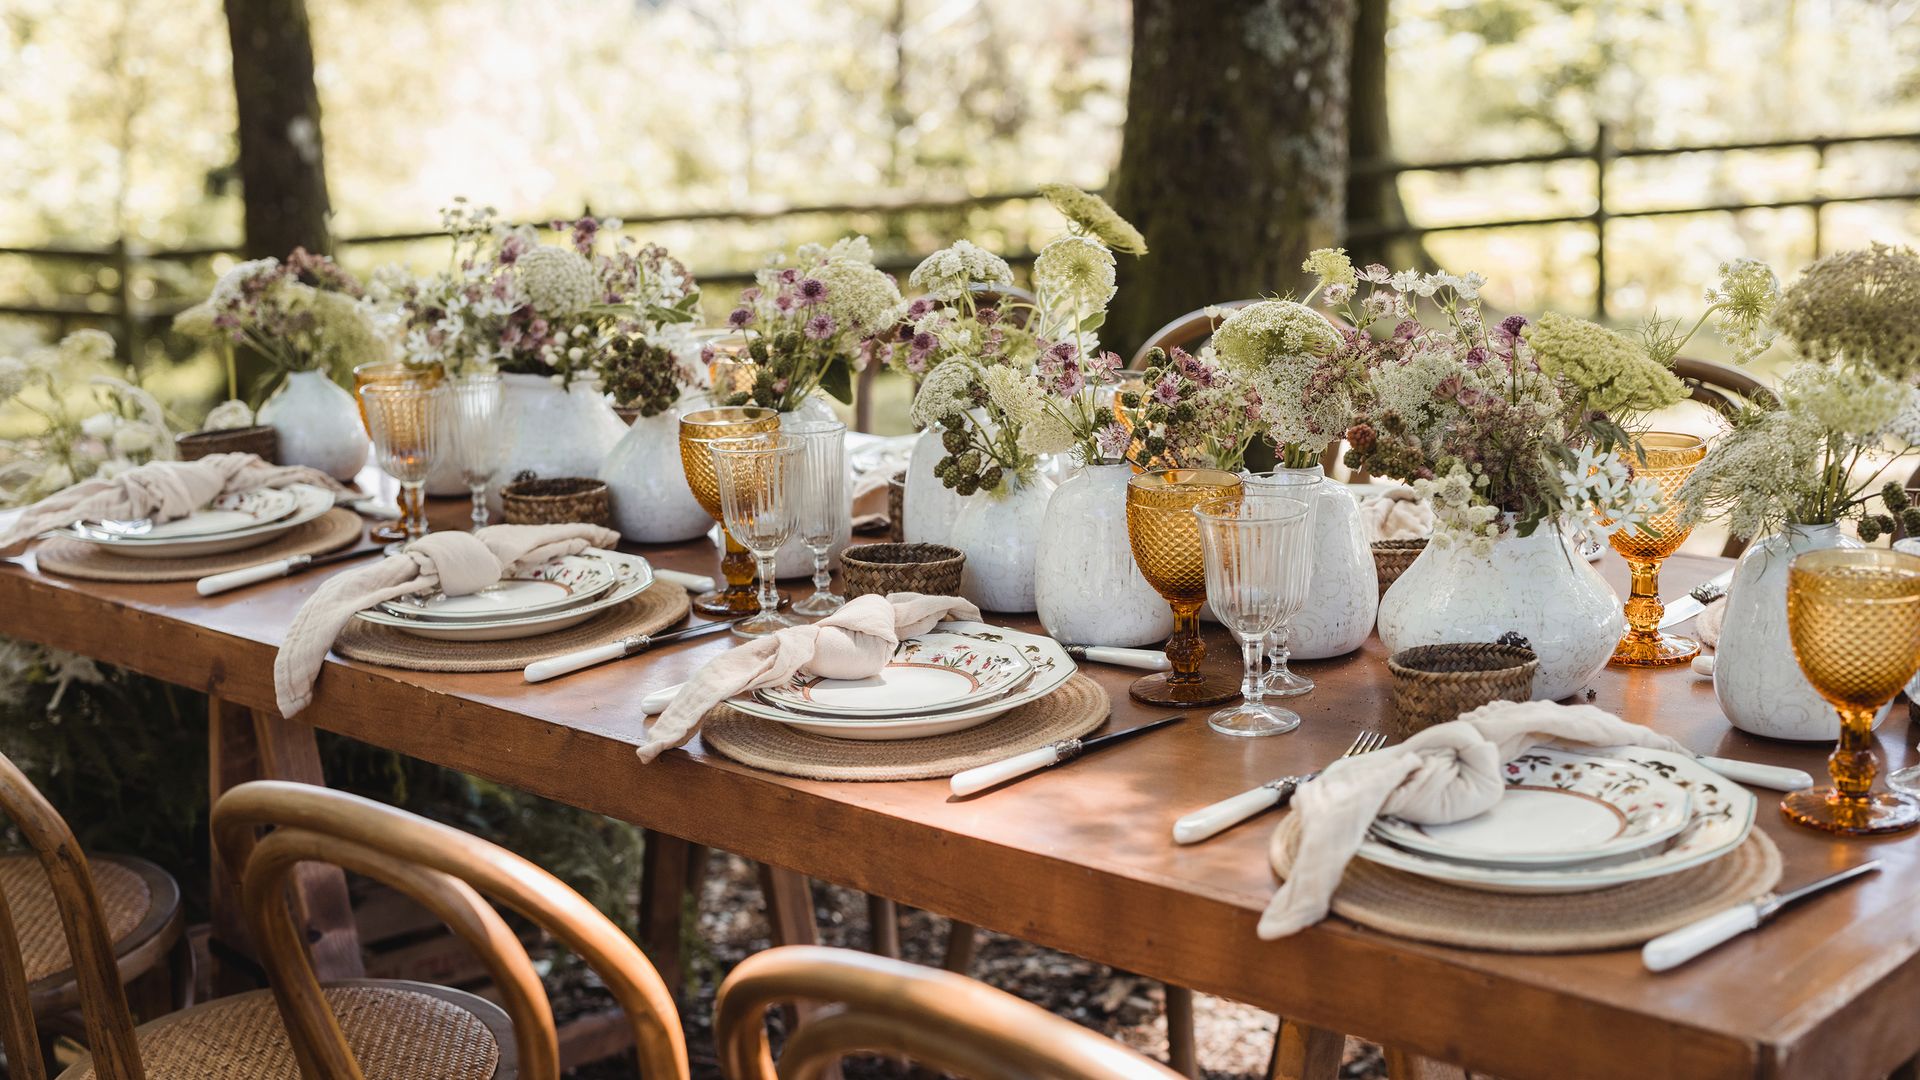 <p>                     Want to impress your guests and throw a dazzling event to remember? These garden party ideas are just what you need. After all, with warmer weather, your outdoor space makes the perfect backdrop to host a special occasion.                   </p>                                      <p>                     Styling things up for a big (or small) do is tons of fun, whether it's introducing a new feature such as a garden bar for alfresco cocktails, or simply getting creative with garden decor ideas and tea lights for a chilled-out vibe. There are the practicalities to think about too, such as the best furniture for easy socializing, ways to keep warm, or even a space to cook the food. And don't forget about the entertainment!                   </p>                                      <p>                     There's lots to bear in mind, but we're here to help you on your way to party planning success.                   </p>                                      <p>                     <em>BY SARAH WILSON, HOLLY CROSSLEY</em>                   </p>